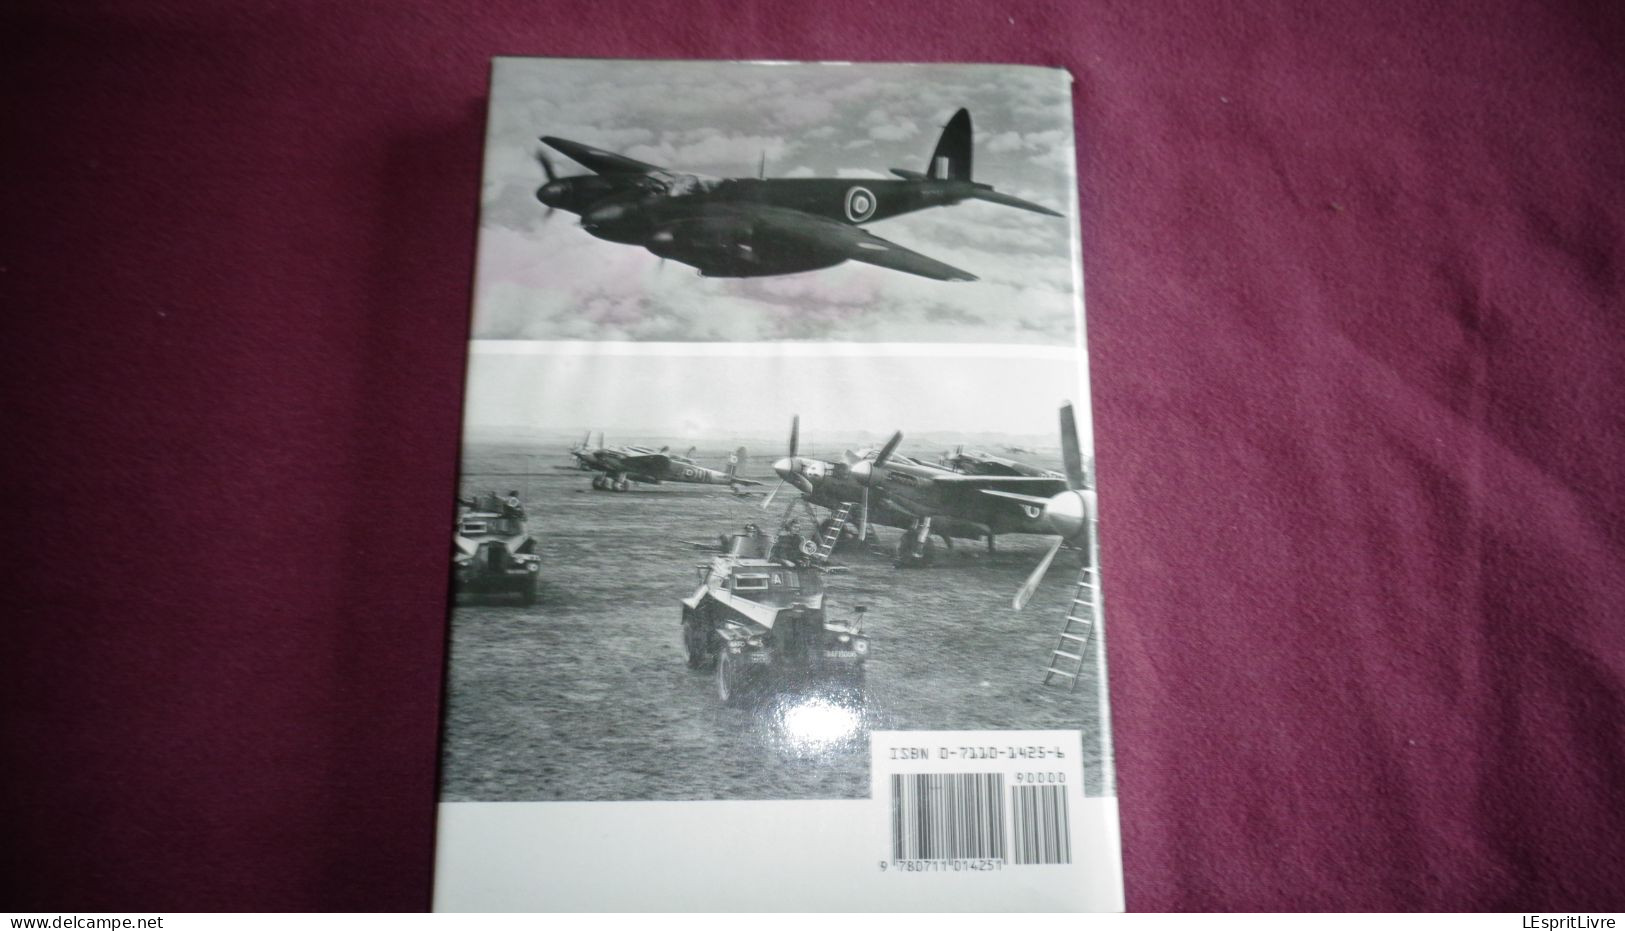 MOSQUITO Squadrons of the Royal Air Force Aviation RAF Markings Guerre 40 45 WW II Aircraft Avion De Havilland Squadron